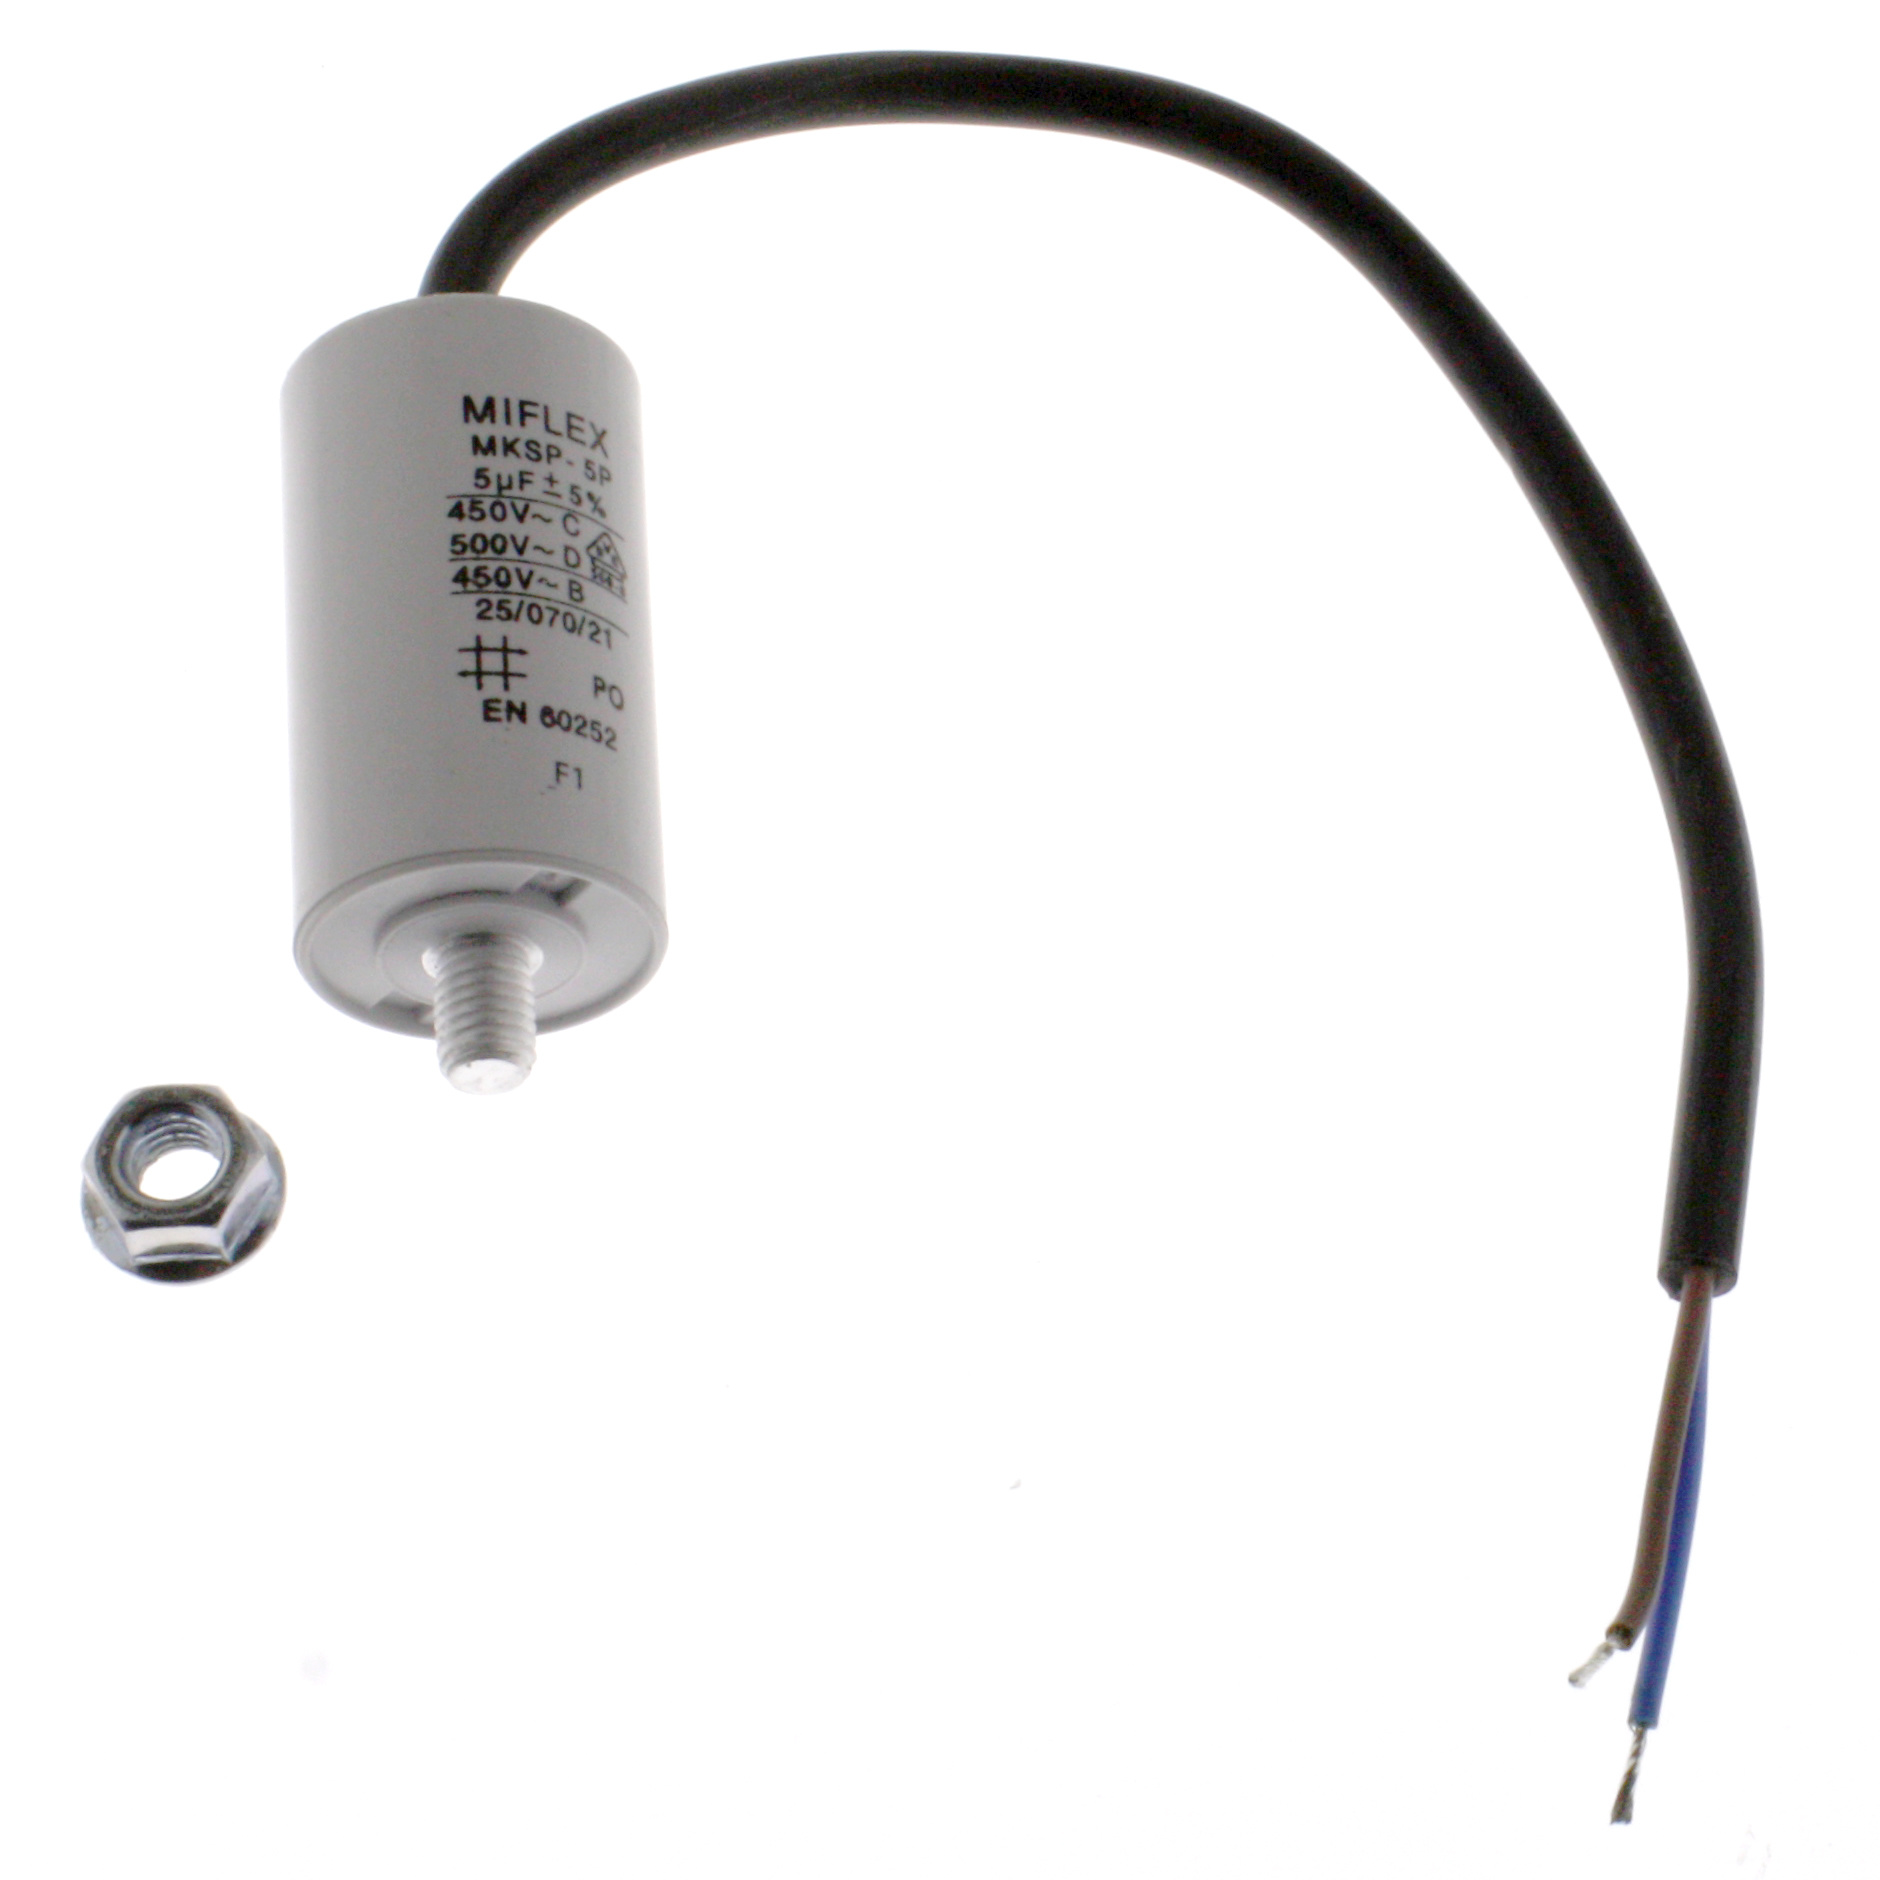 Motor Capacitor 5uF-450V, 30x53mm, cable connection